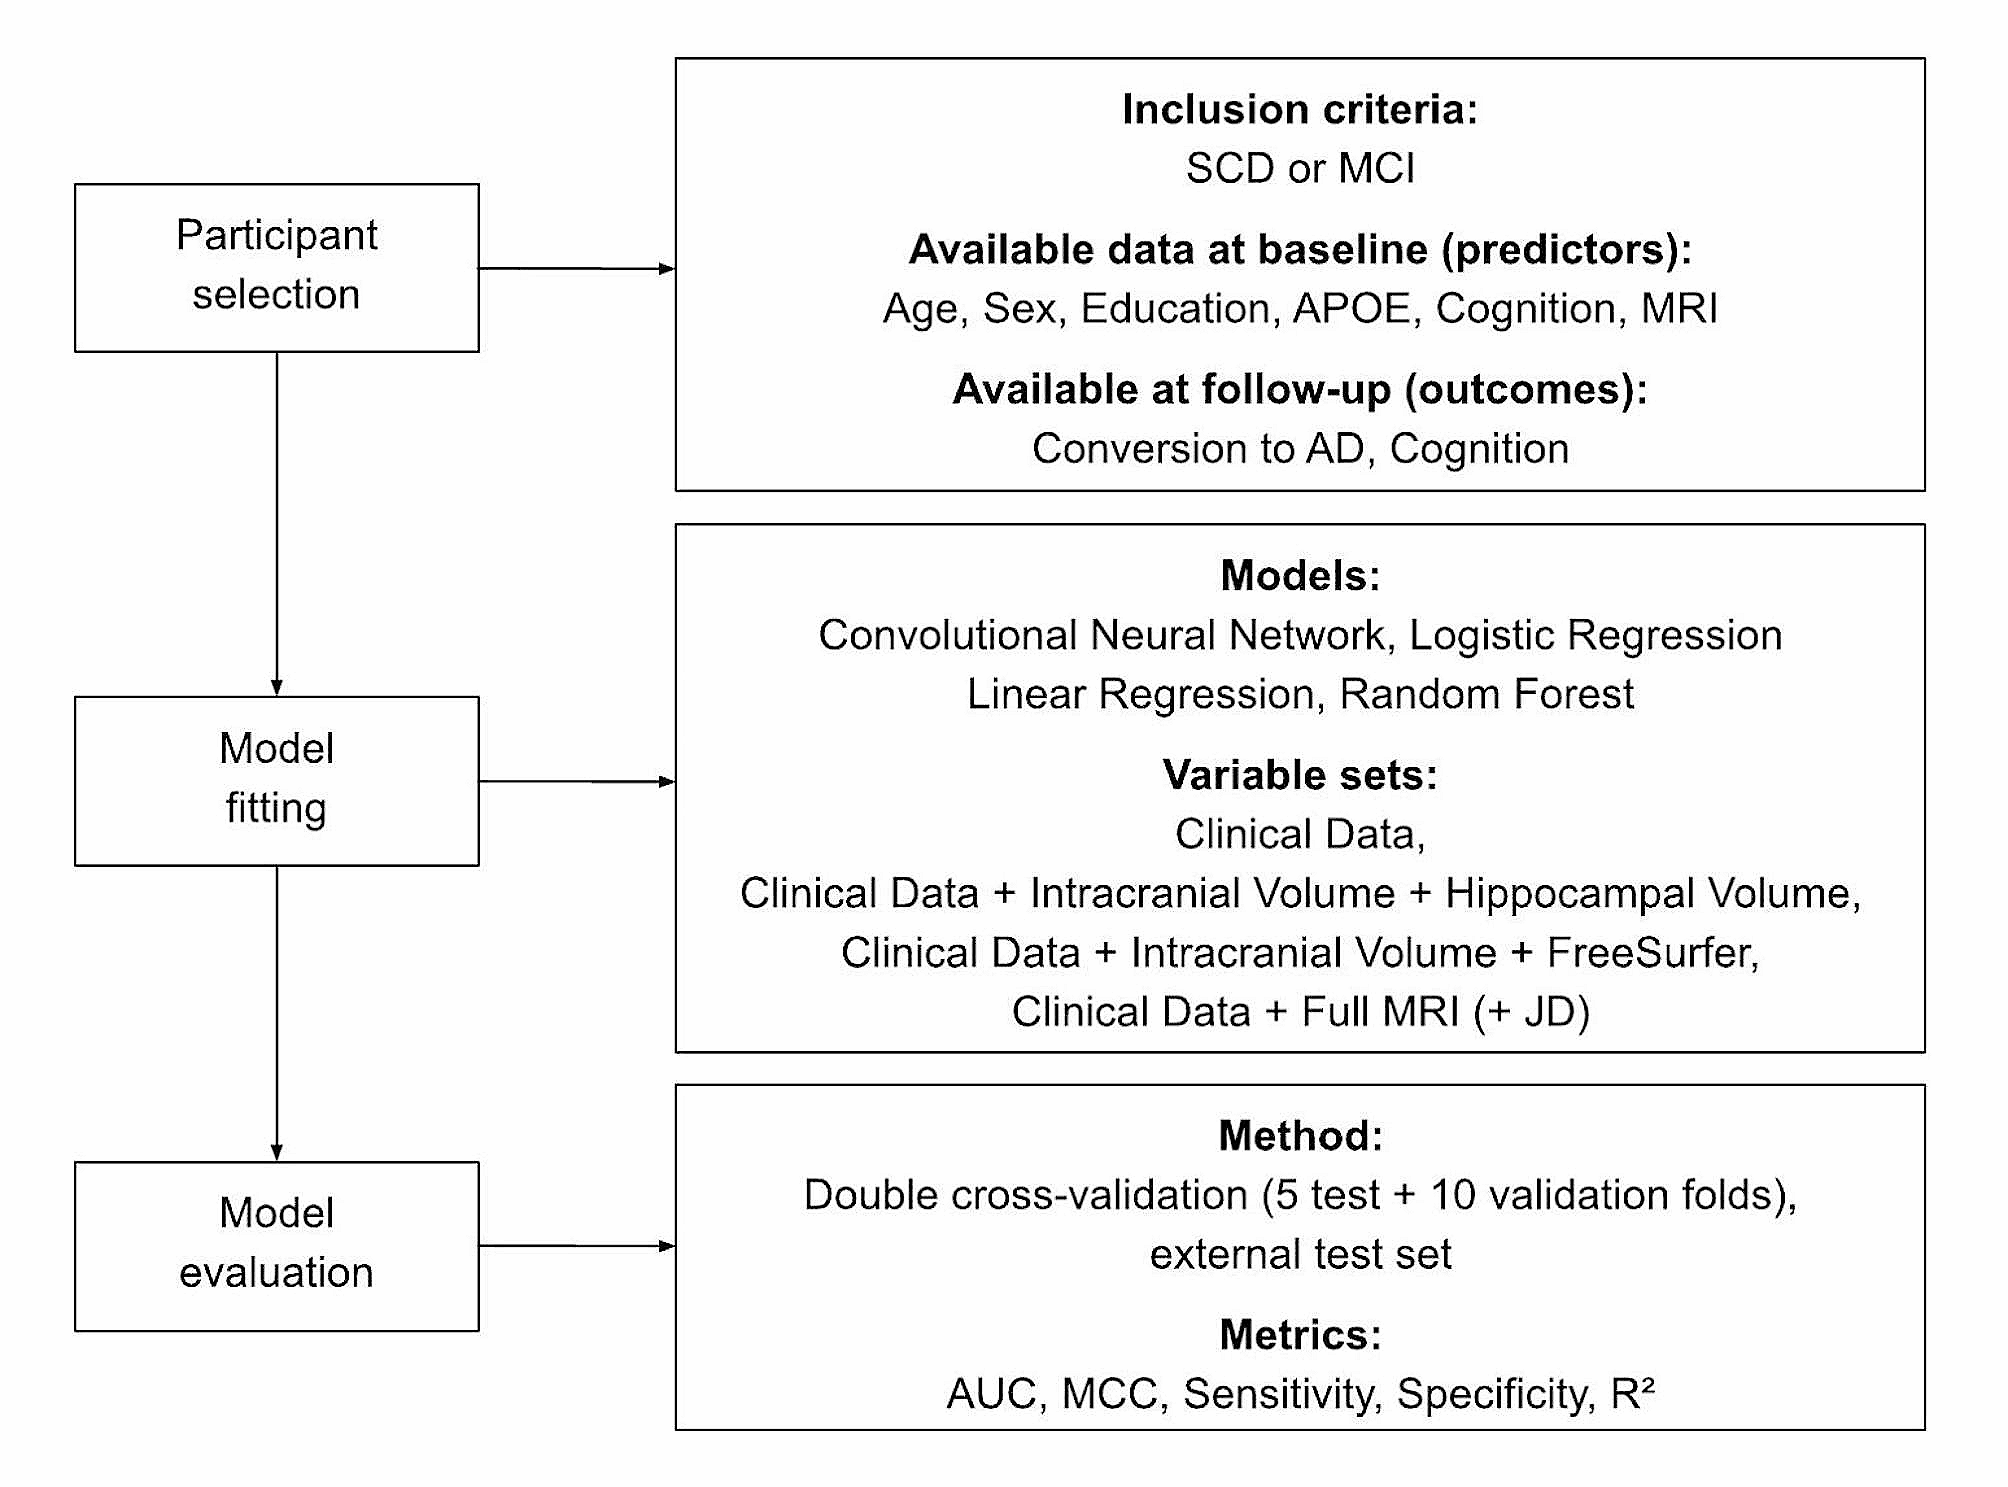 Comparing a pre-defined versus deep learning approach for extracting brain atrophy patterns to predict cognitive decline due to Alzheimer’s disease in patients with mild cognitive symptoms